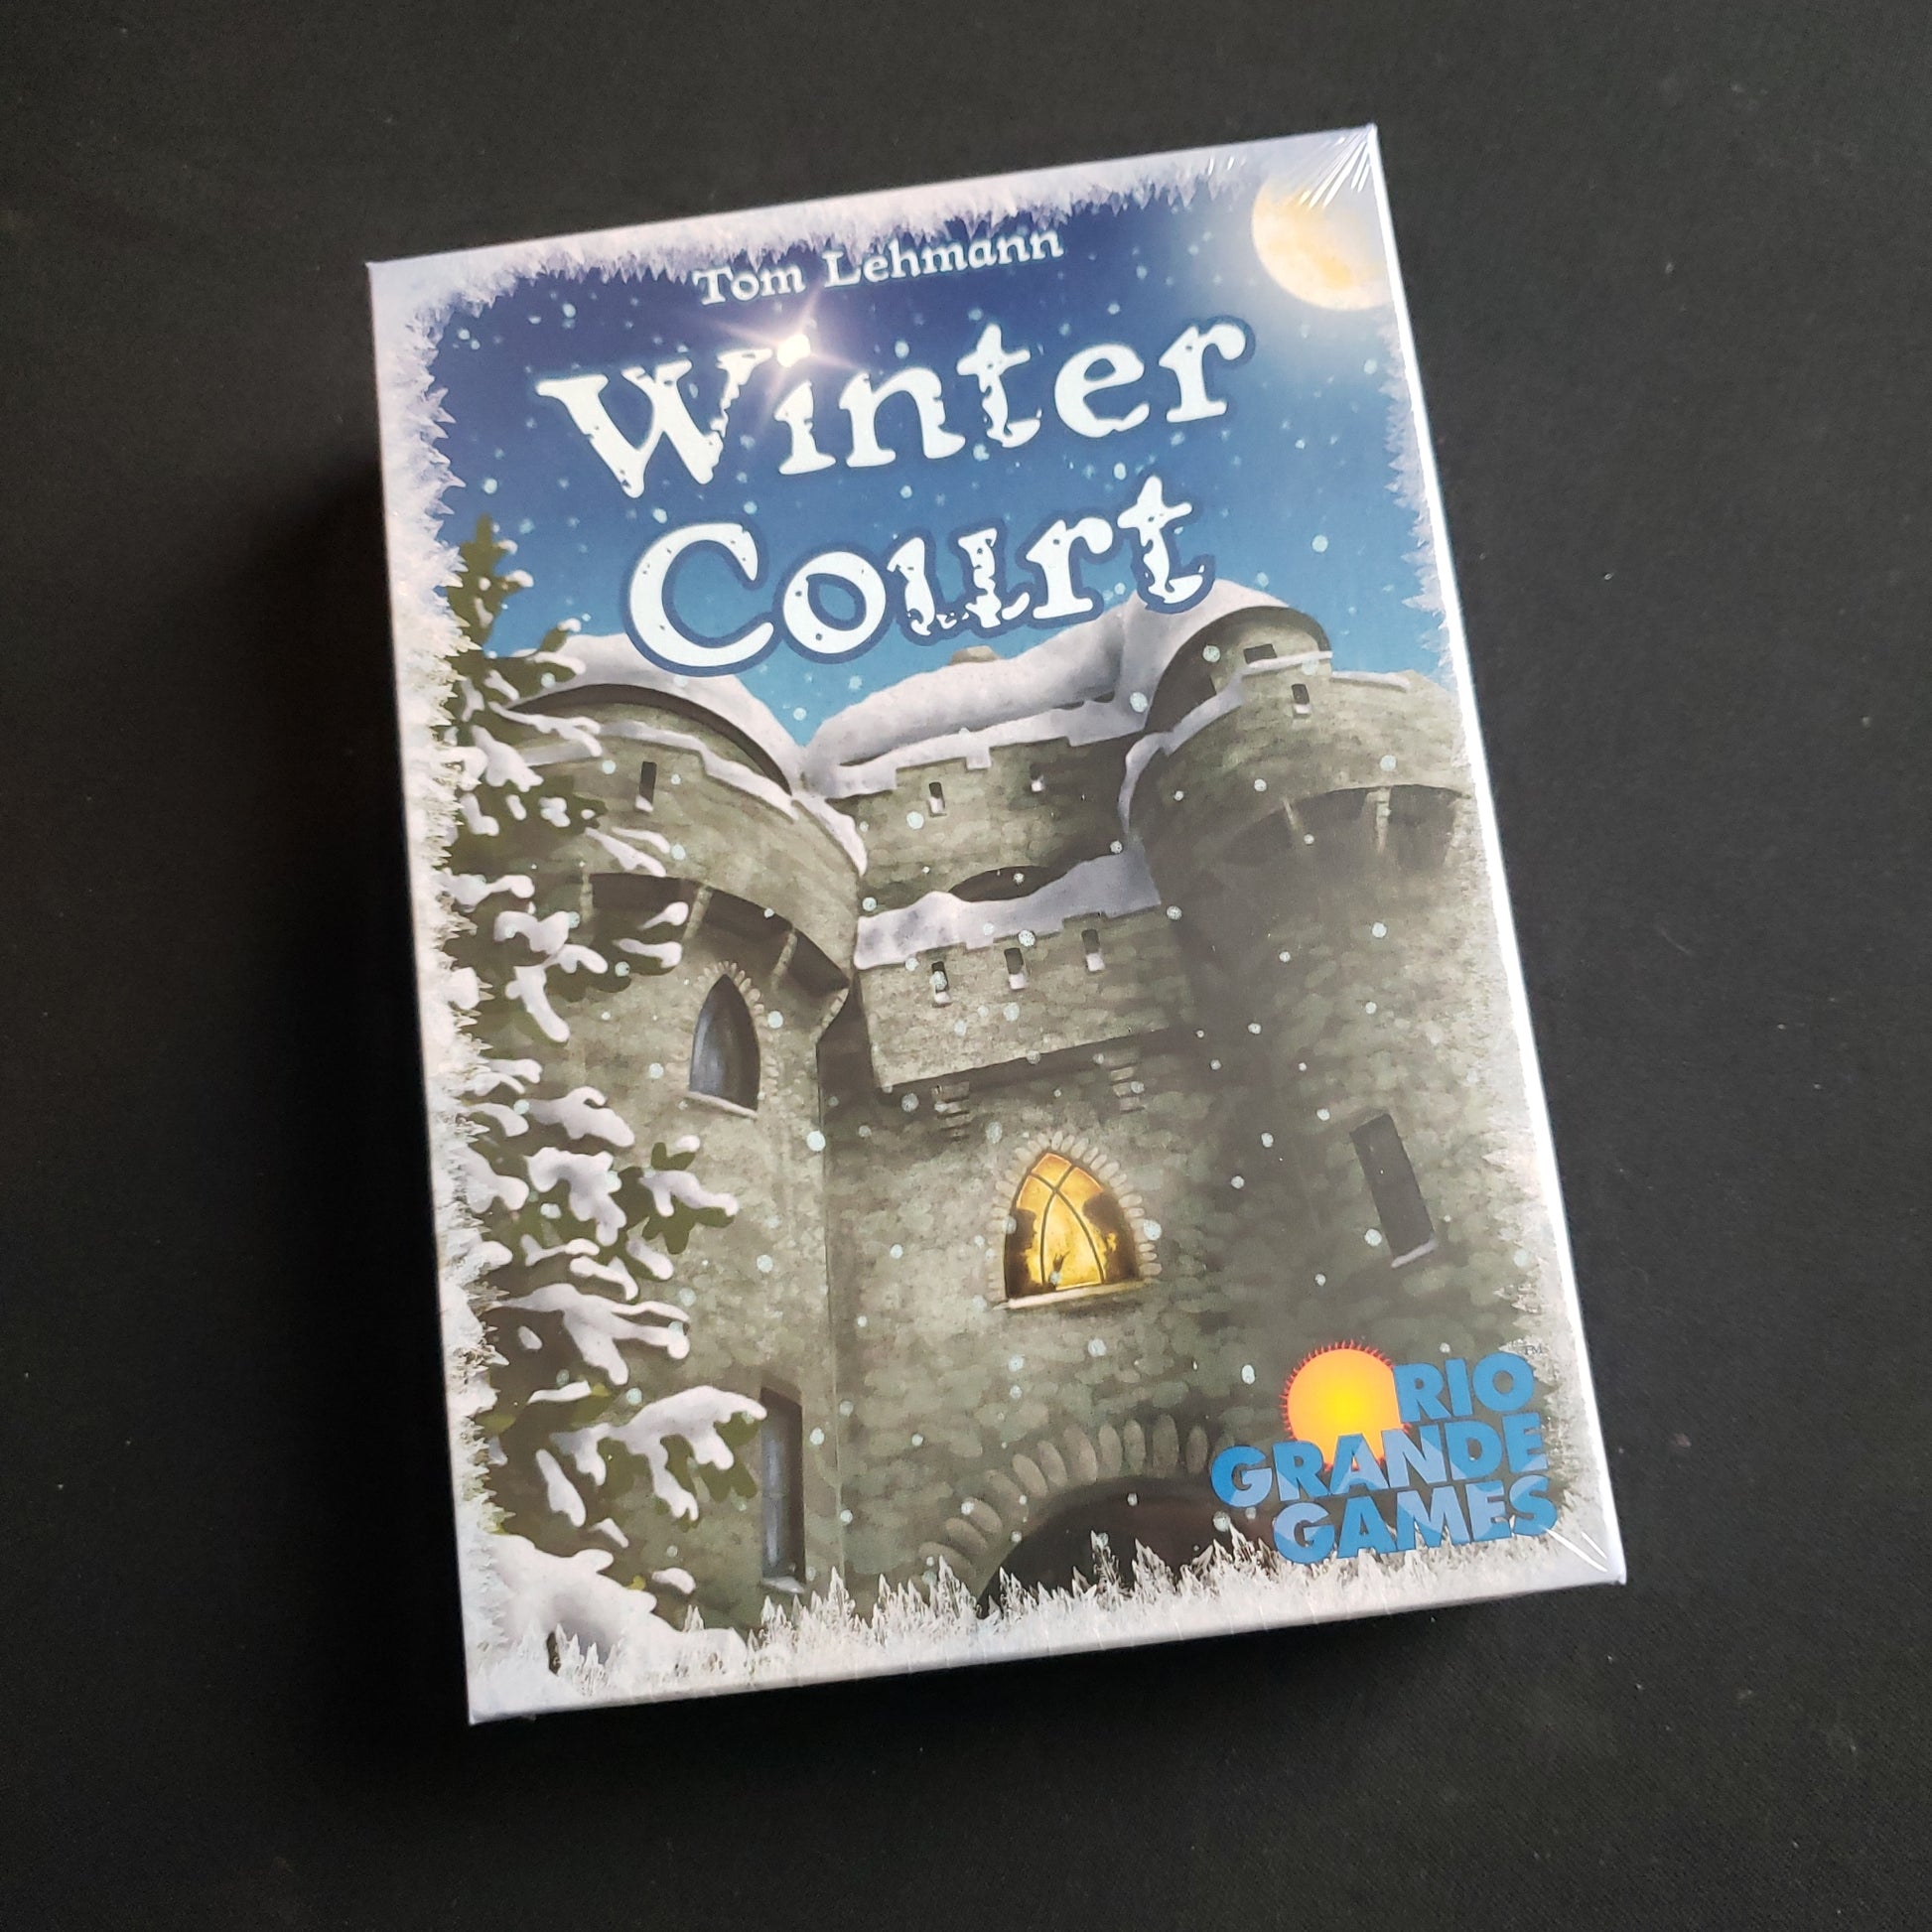 Image shows the front cover of the box of the Winter Court board game